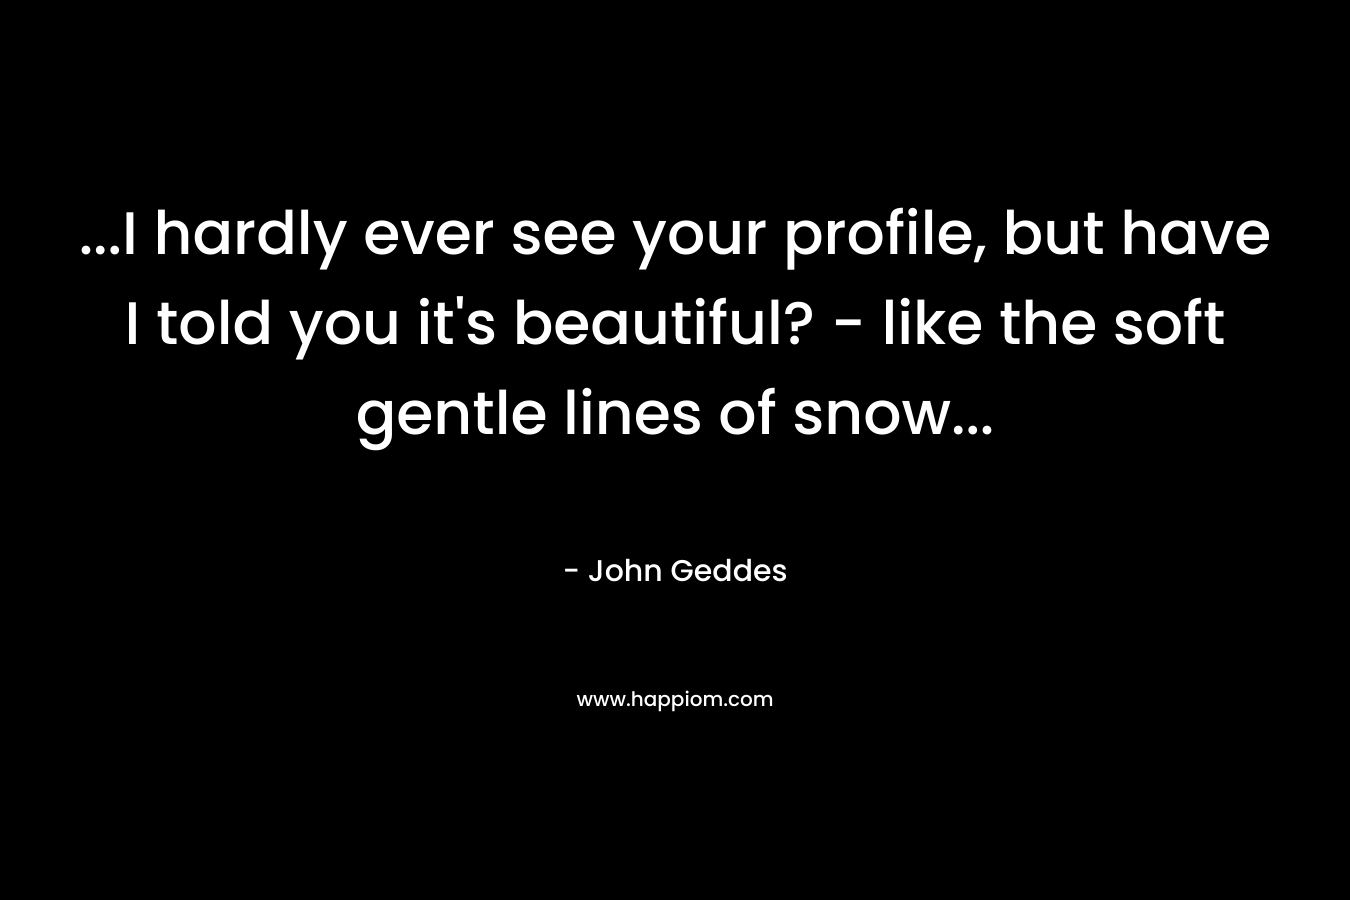 ...I hardly ever see your profile, but have I told you it's beautiful? - like the soft gentle lines of snow...